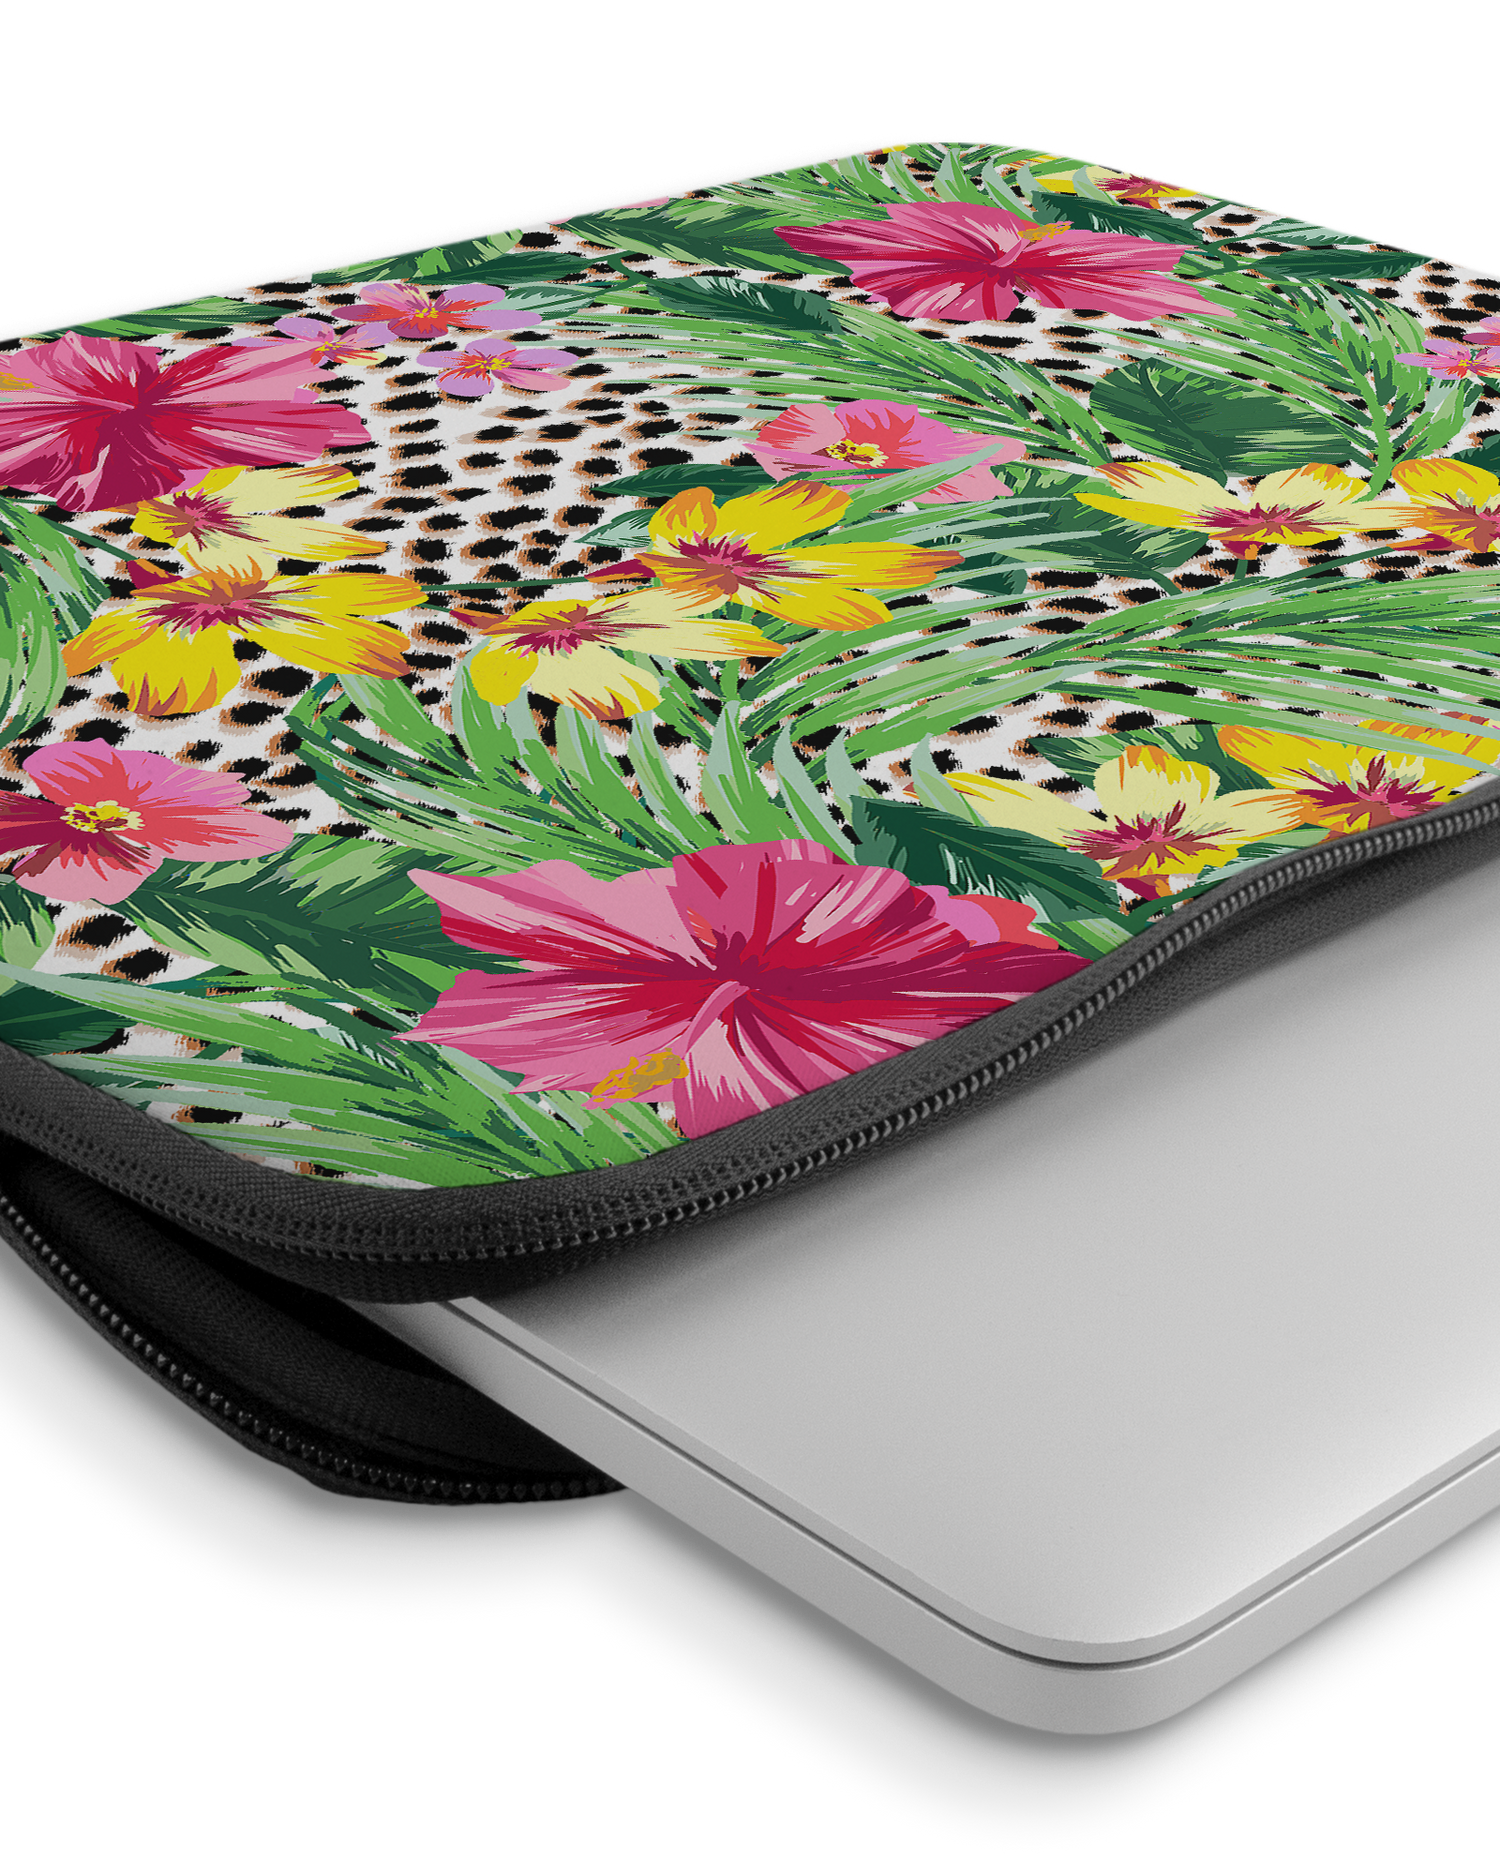 Tropical Cheetah Laptop Case 14-15 inch with device inside